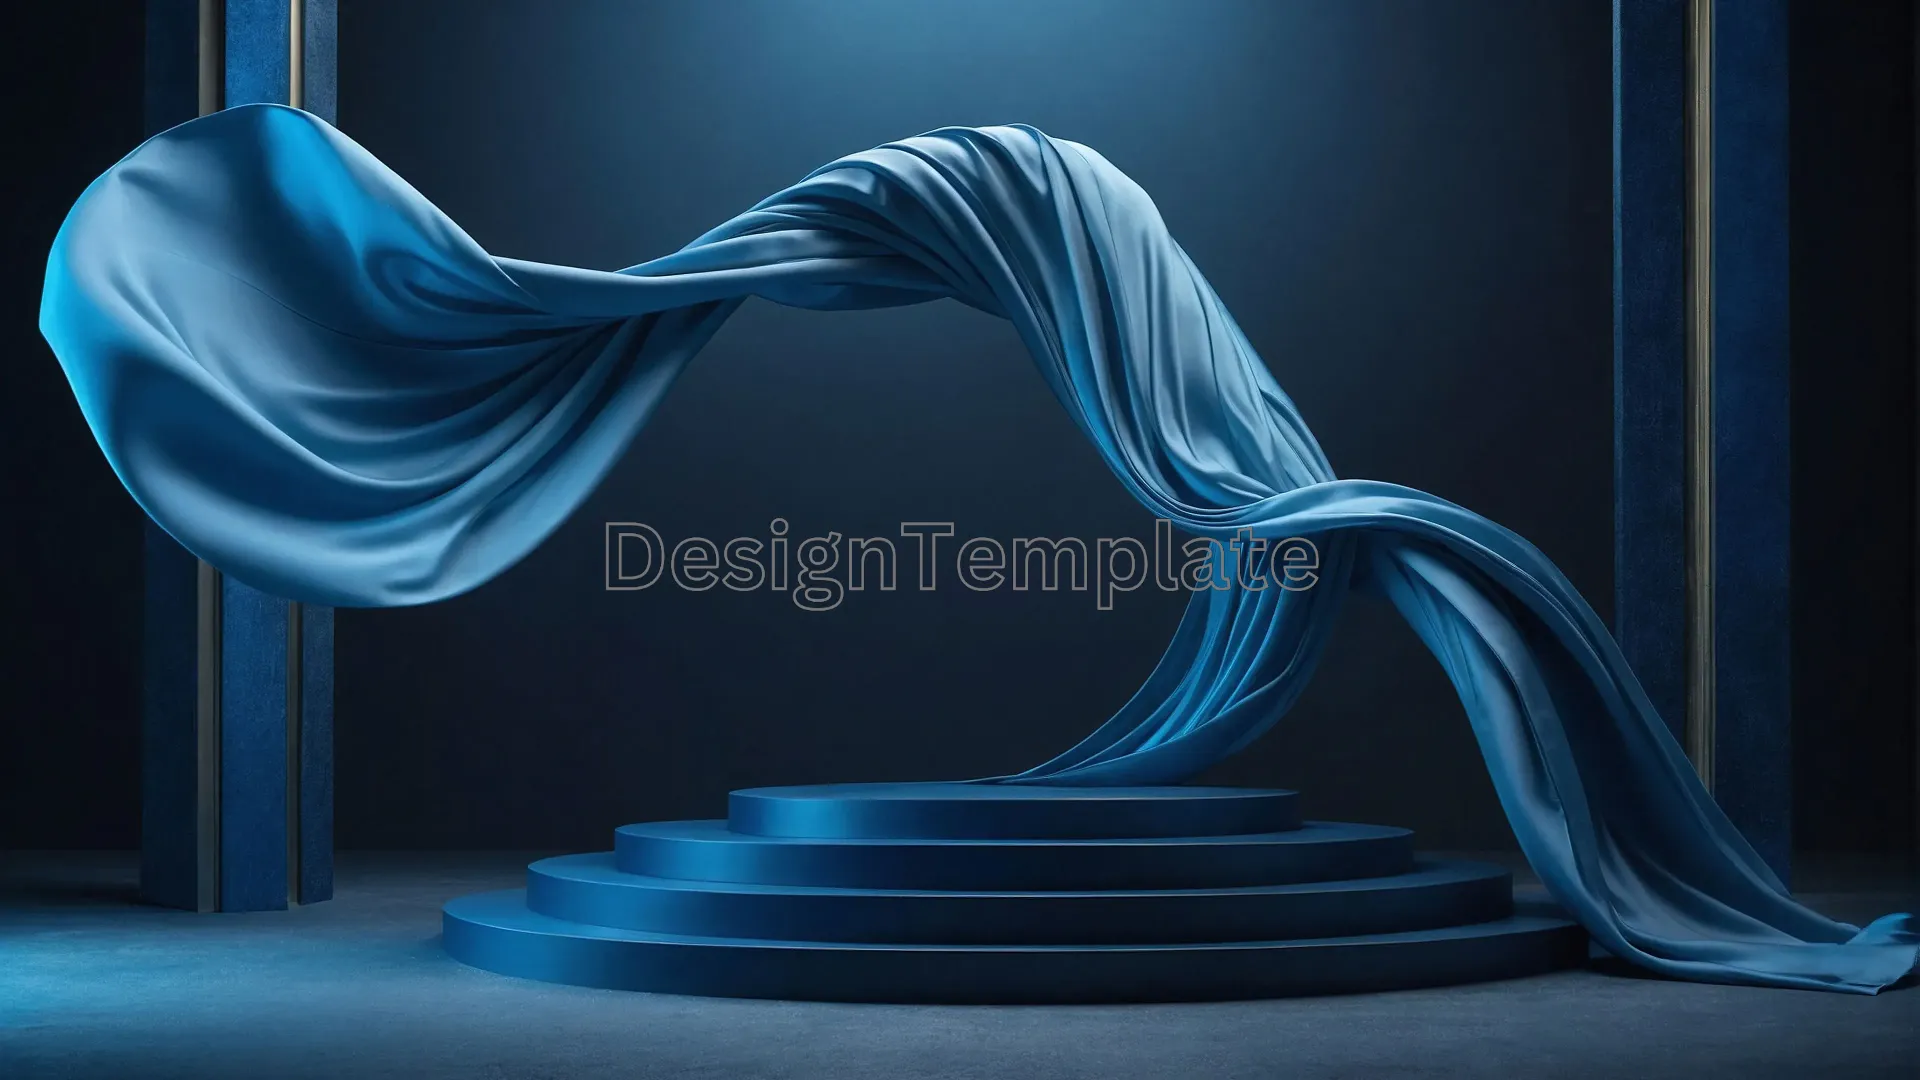 Artistic Silk Cloth and 3D Podium Background image